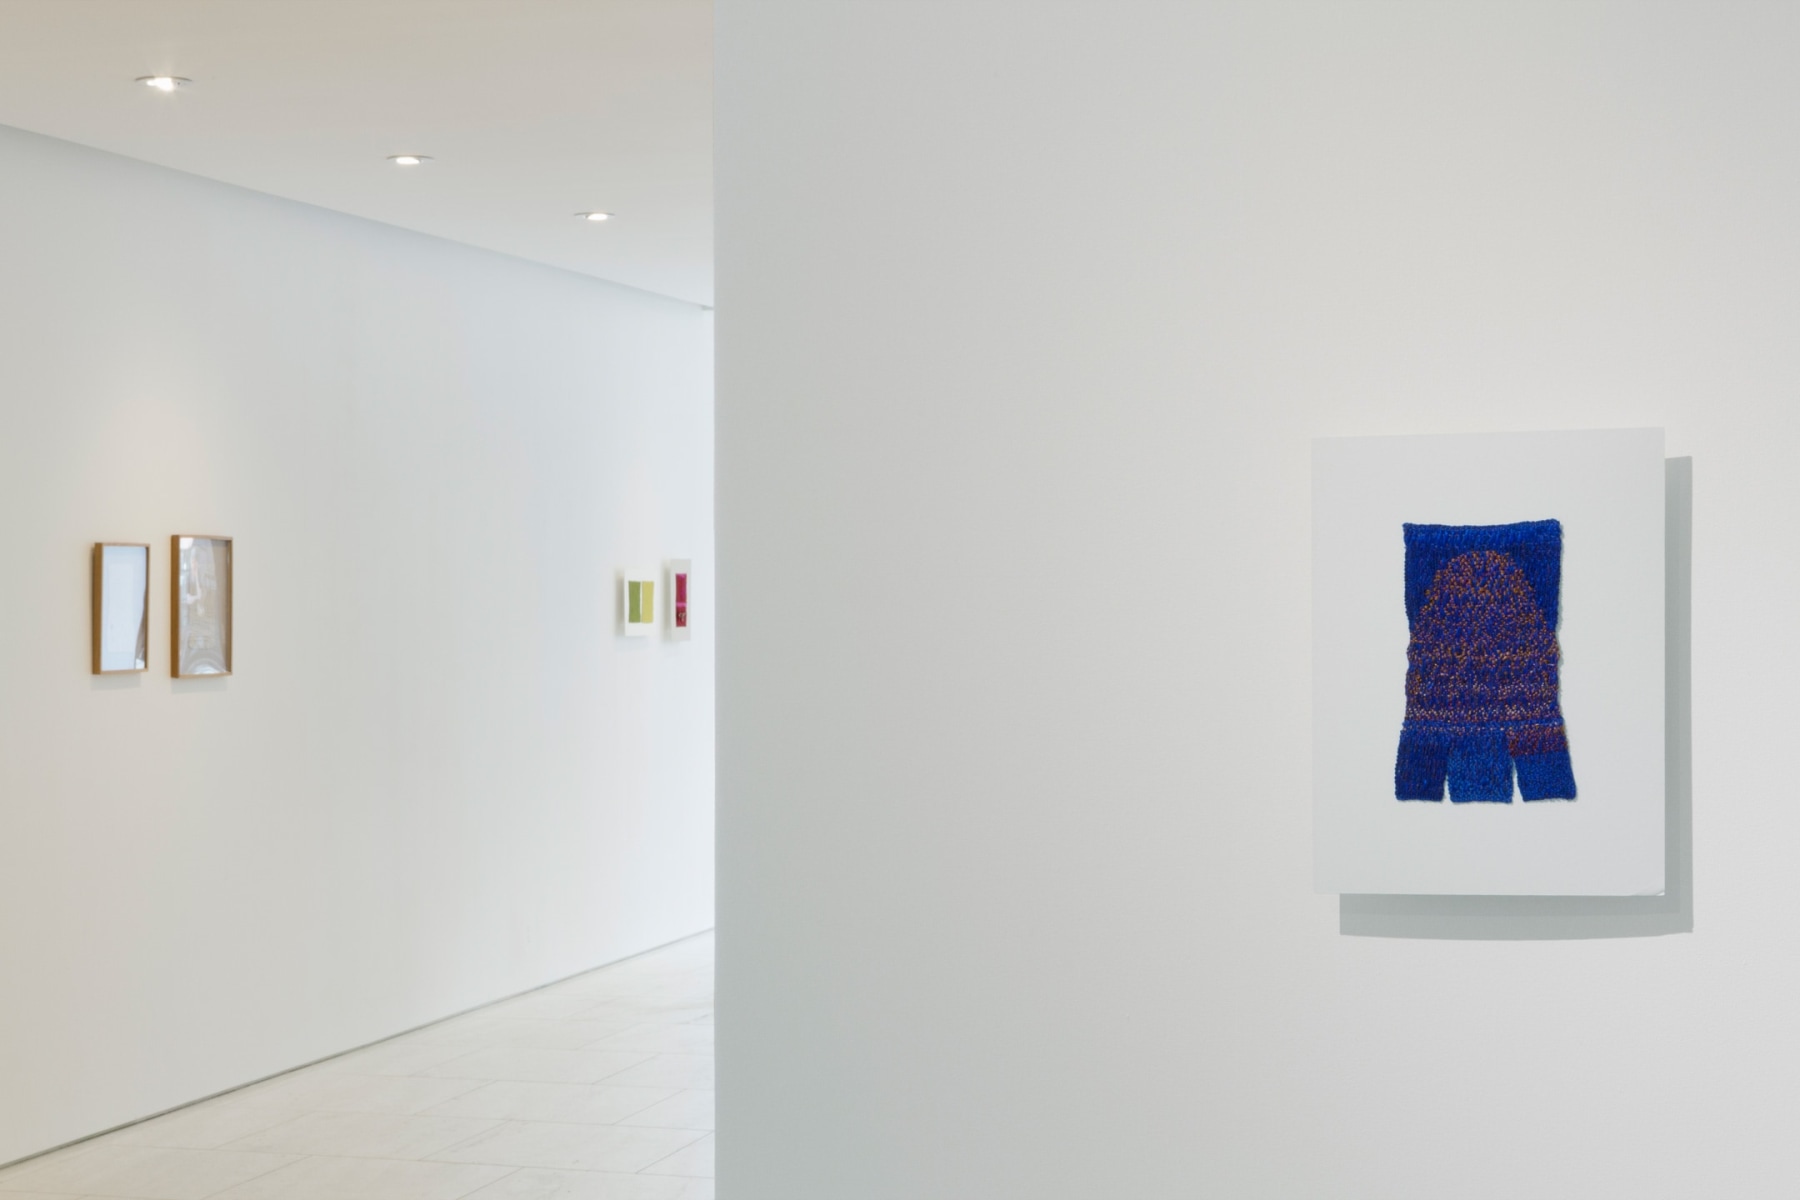 Installation view of&nbsp;Sheila Hicks: Line by Line, Step by Step, April 29 &ndash; August 17, 2019